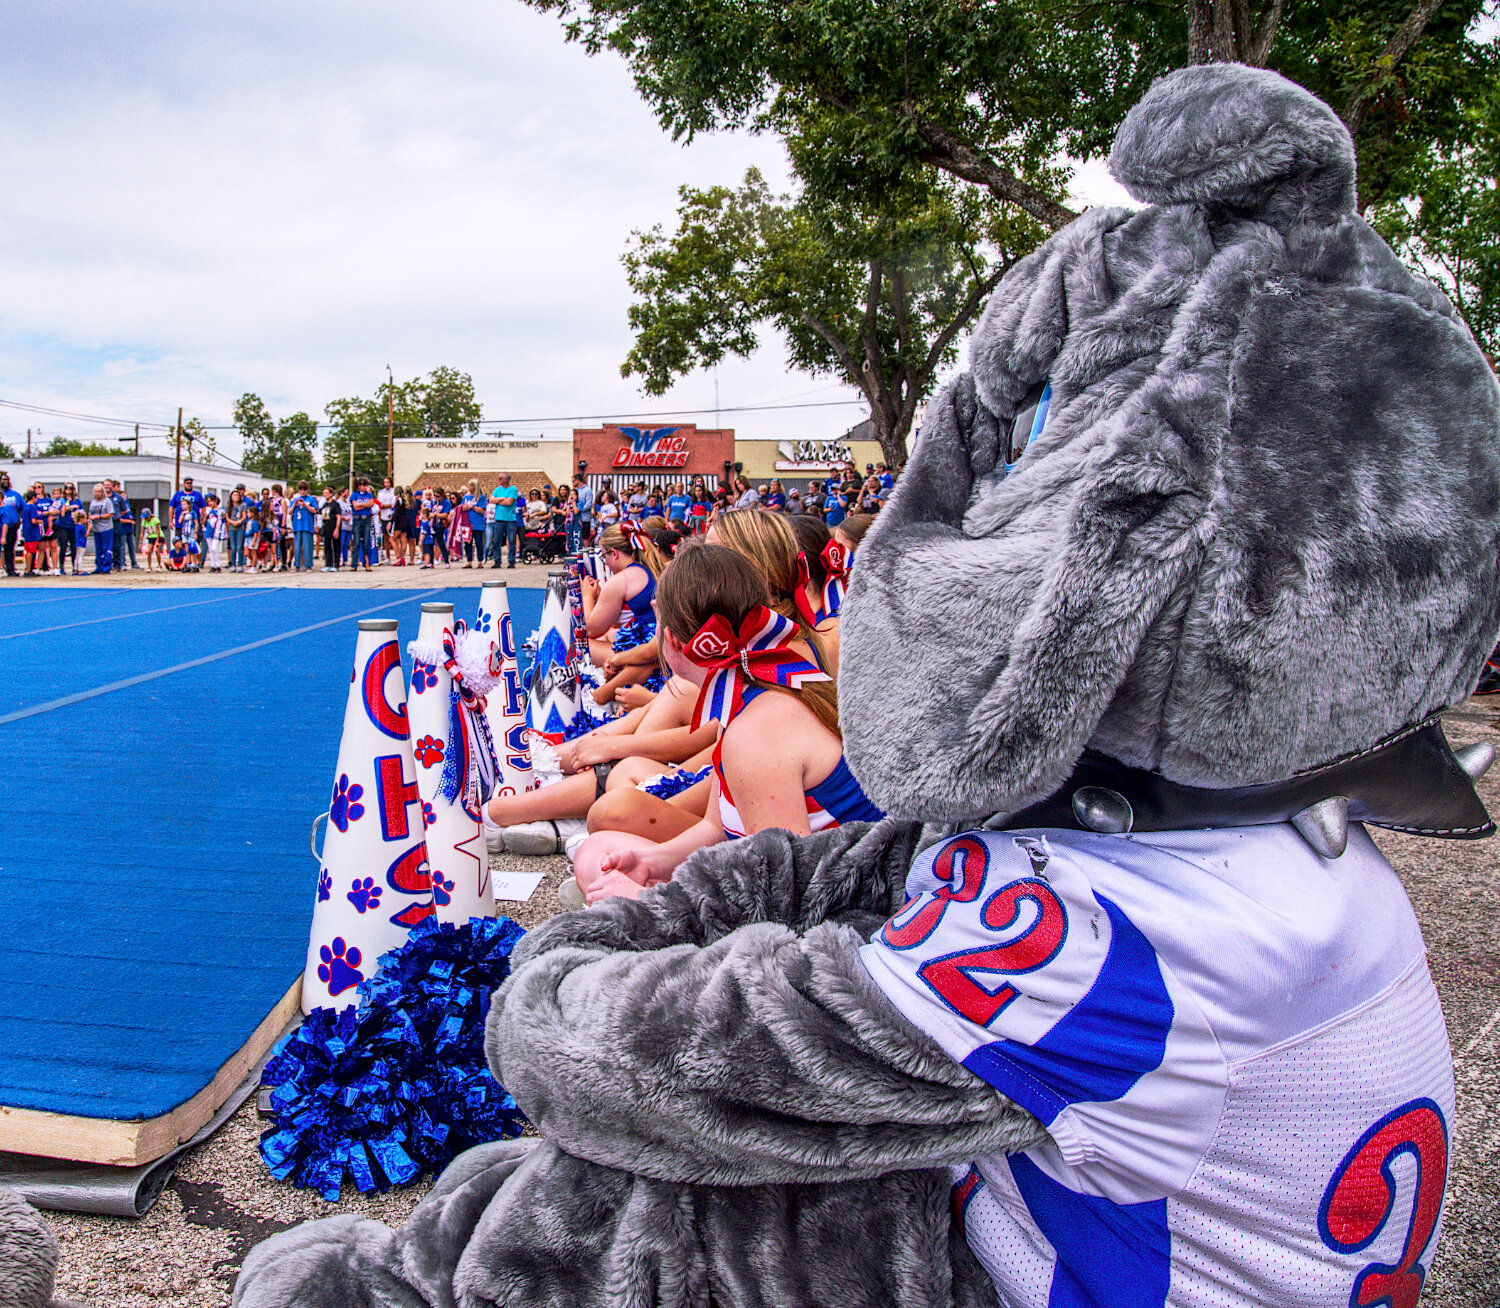 The Quitman Bulldogs cheerleaders and mascots wait patiently for their turn to rile up the crown on the courthouse lawn. [see more sights & buy Bulldogs prints]